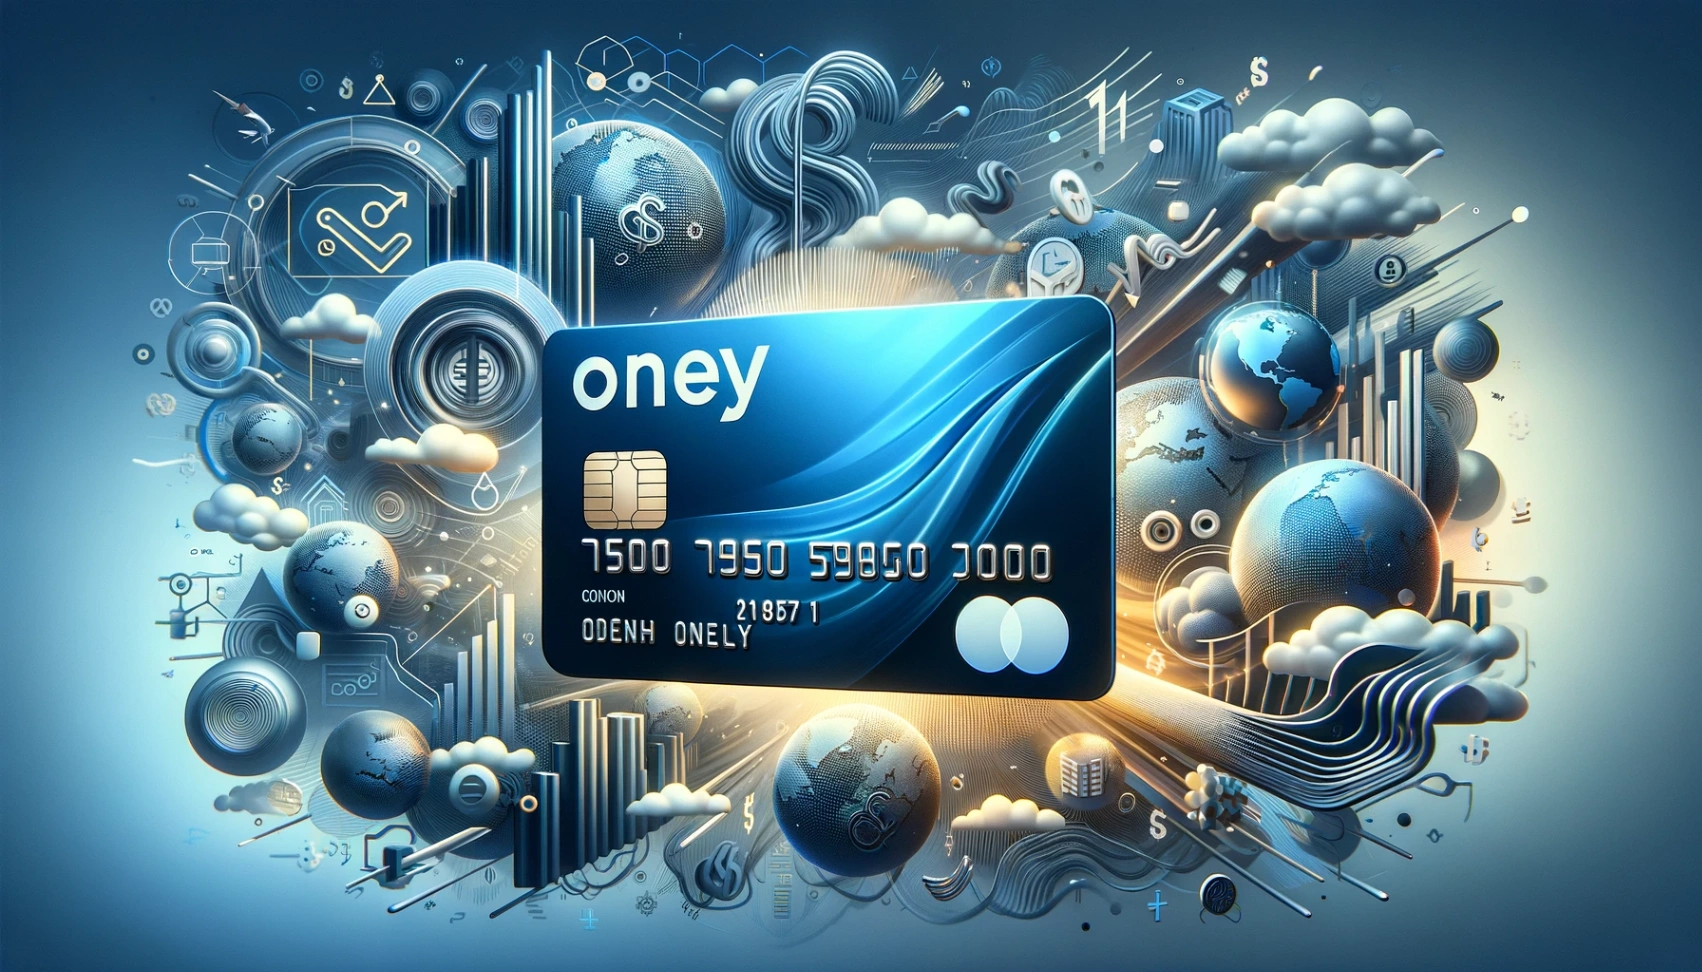 Step-by-Step to Your Oney Credit Card: Online Application Process